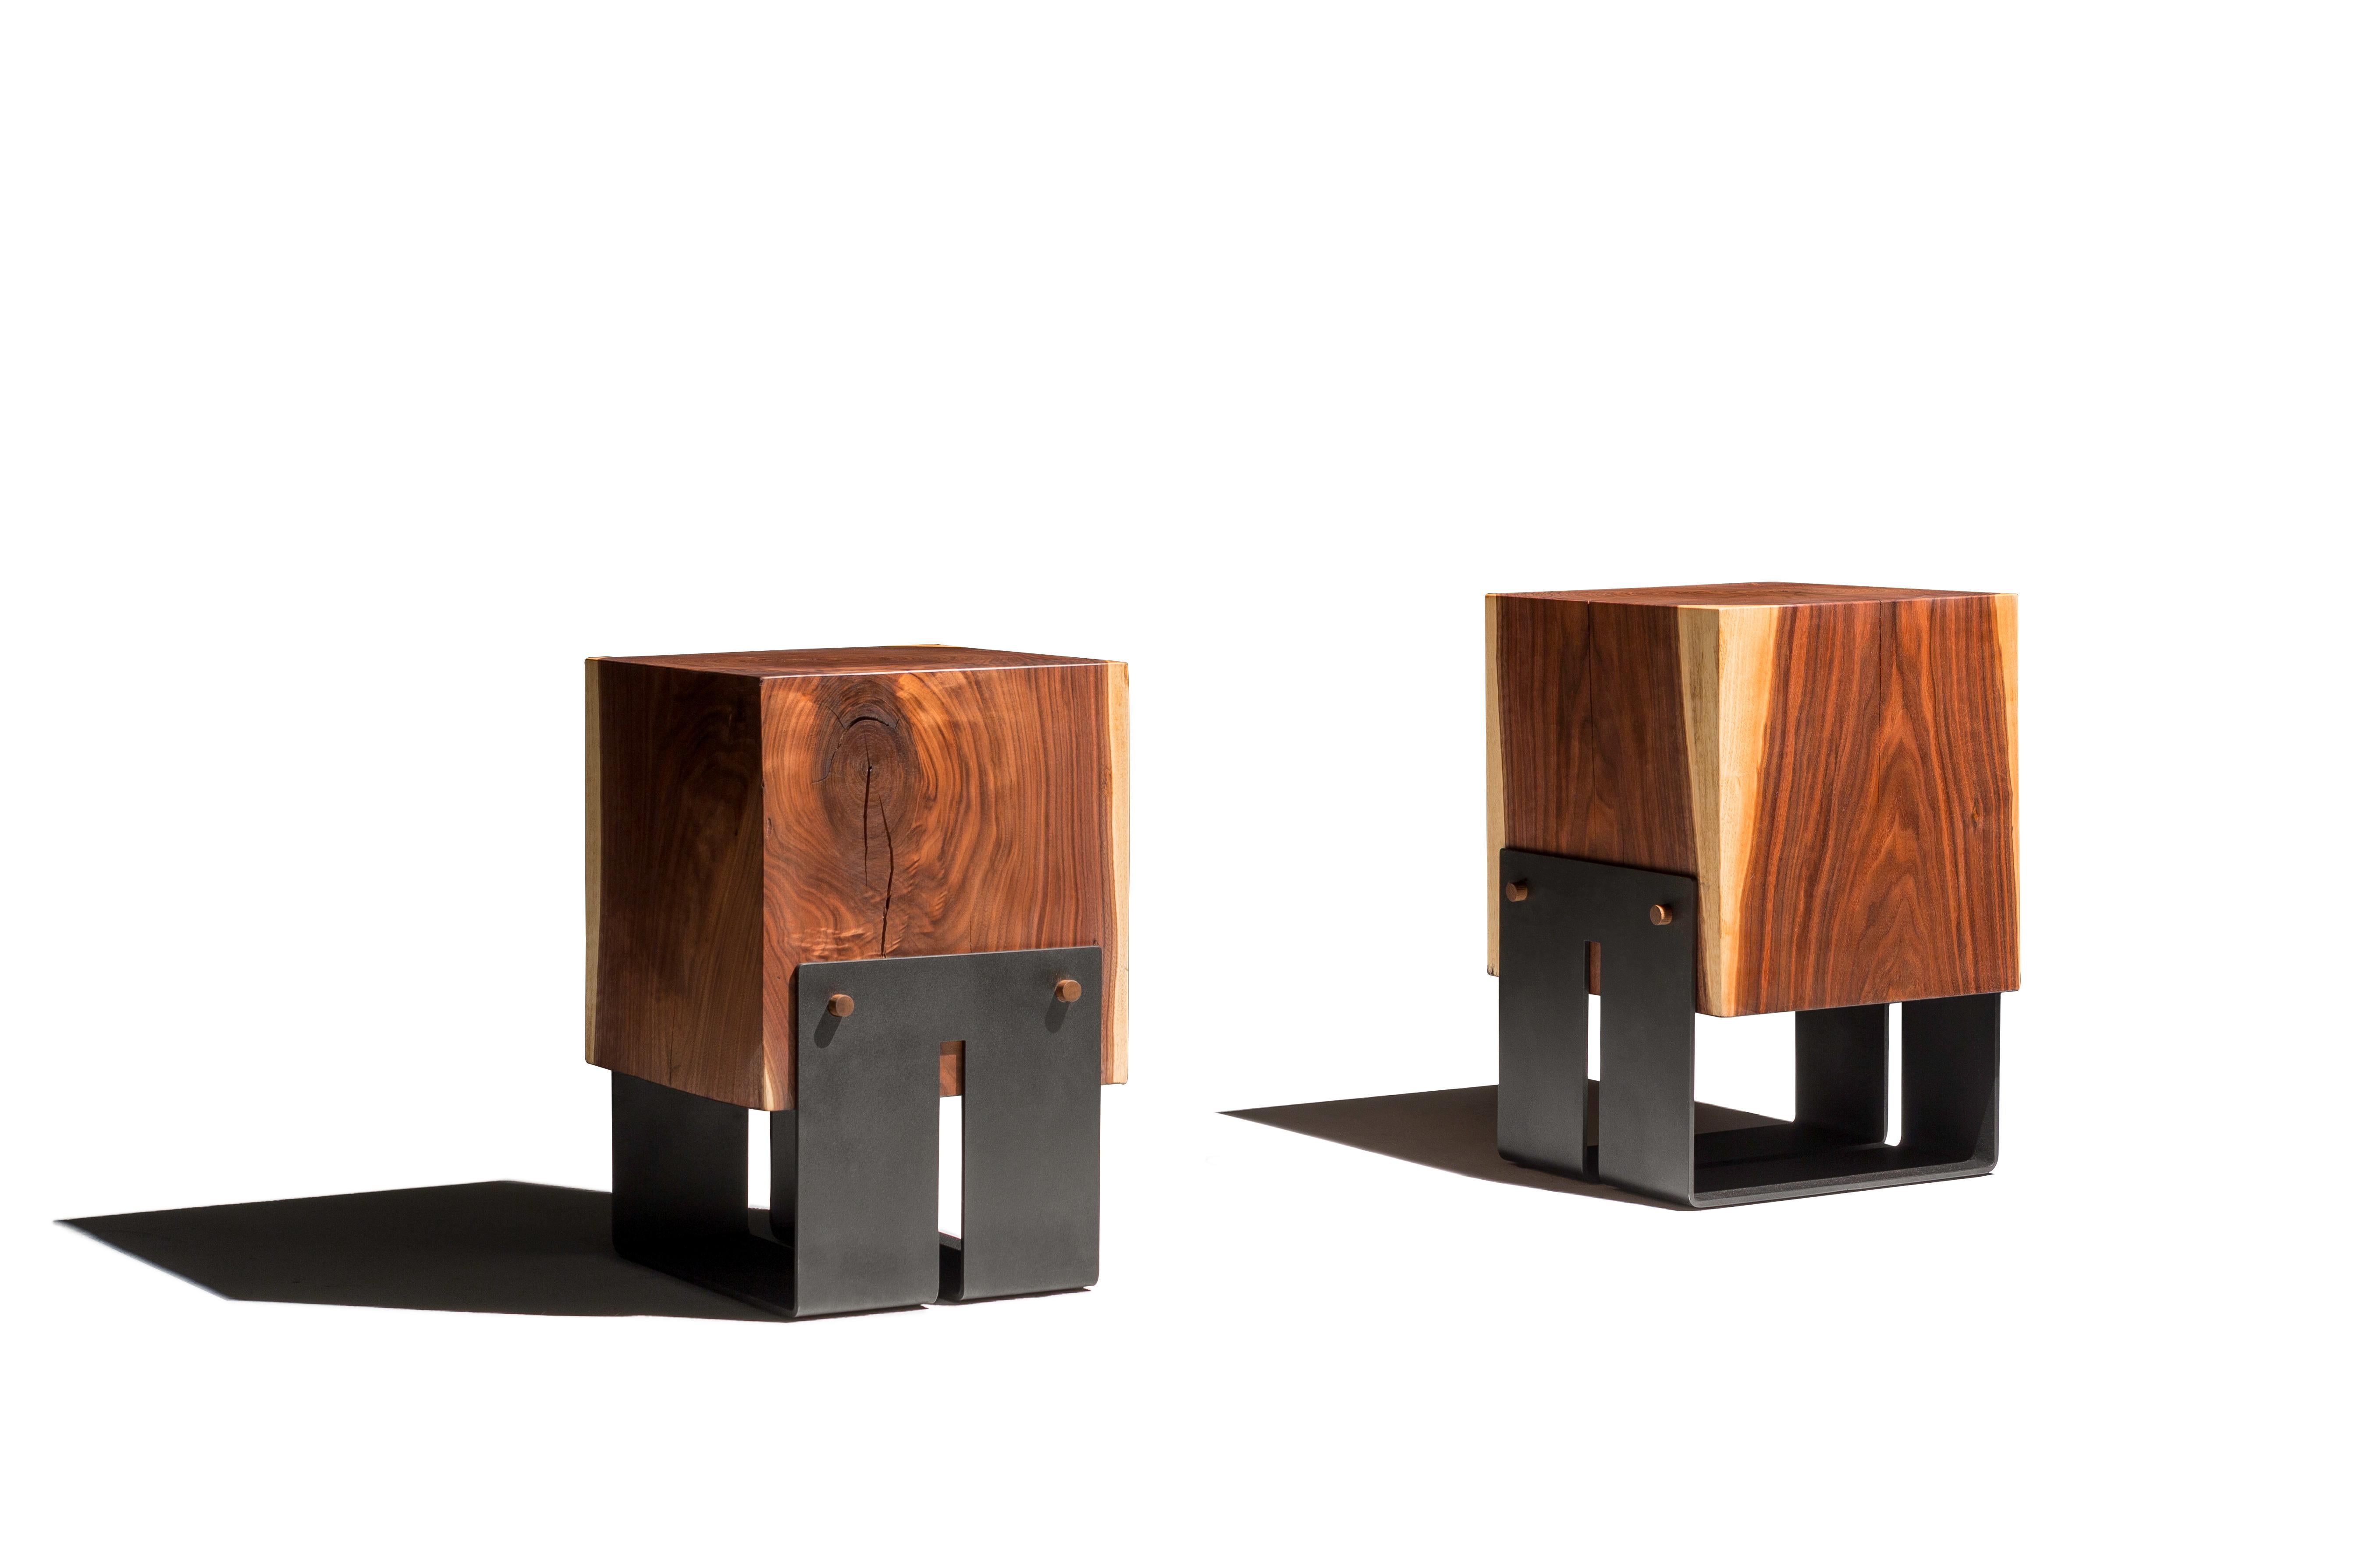 The Briggs side table incorporates a modern industrial style to the natural beauty of a solid walnut block. With a blackened steel base connected by dowels, these side tables are both structurally and aesthetically superior. This item can also be